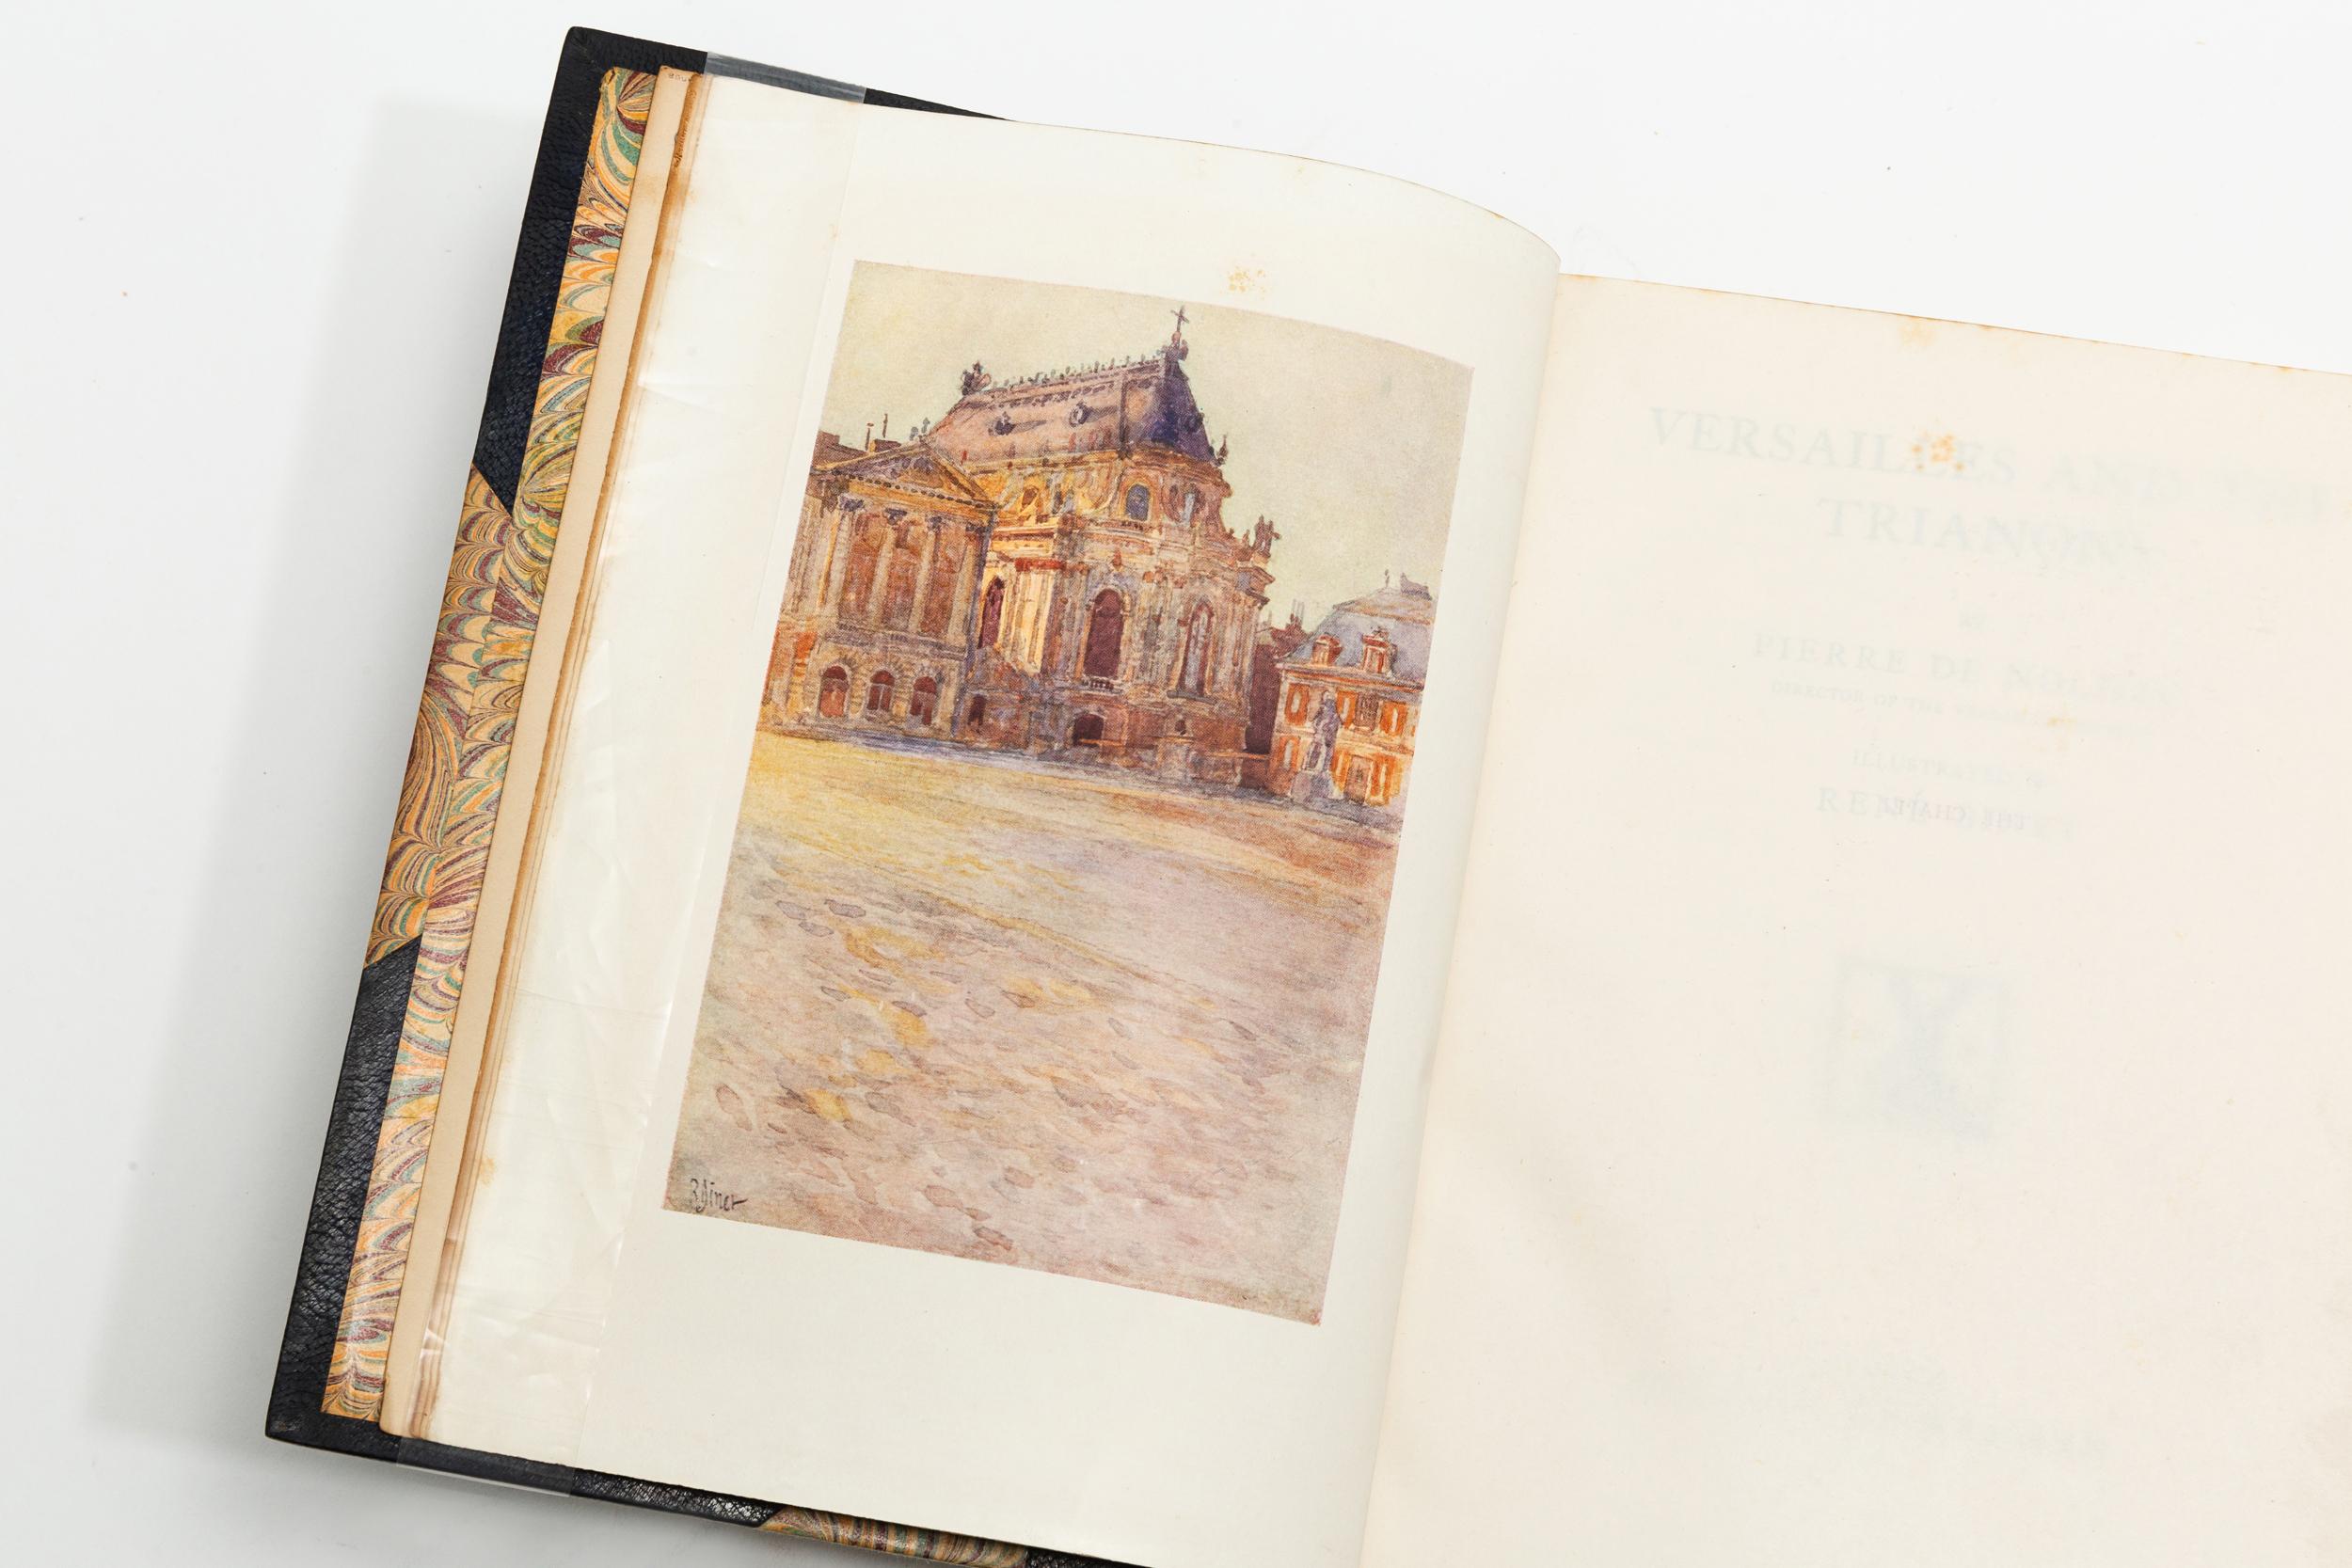 1 Volume. Pierre DeNolhac. Versailles and The Trianons. Illustrated in color by
Rene Binet. Bound in 3/4 blue morocco, marbled boards and endpapers, top edges gilt, raised bands, ornate gilt on spines.(some minor foxing)
Published: London: William